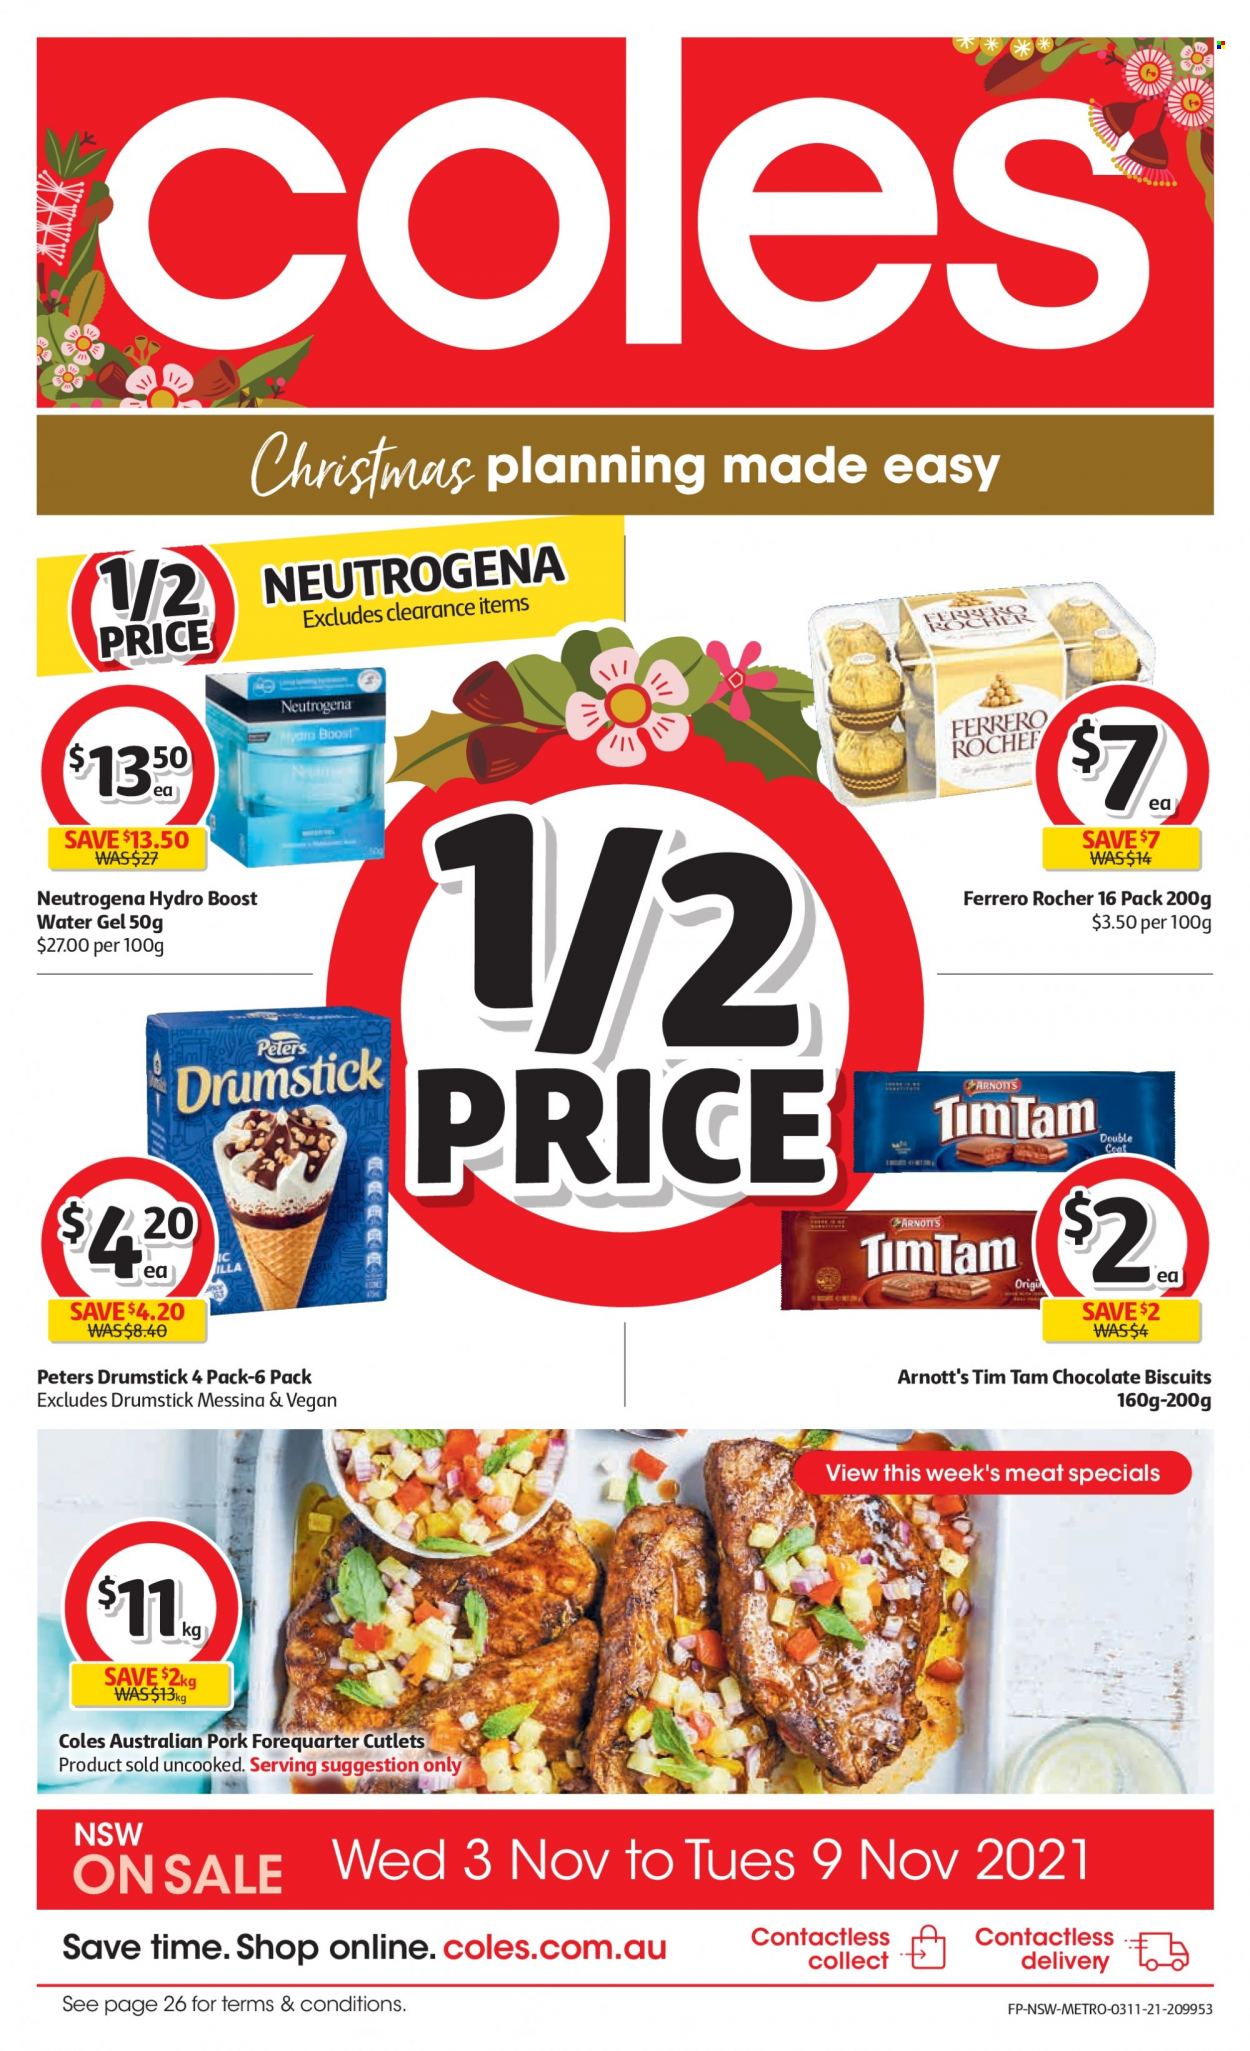 thumbnail - Coles Catalogue - 3 Nov 2021 - 9 Nov 2021 - Sales products - chocolate, Ferrero Rocher, Tim Tam, biscuit, Boost, Neutrogena. Page 1.